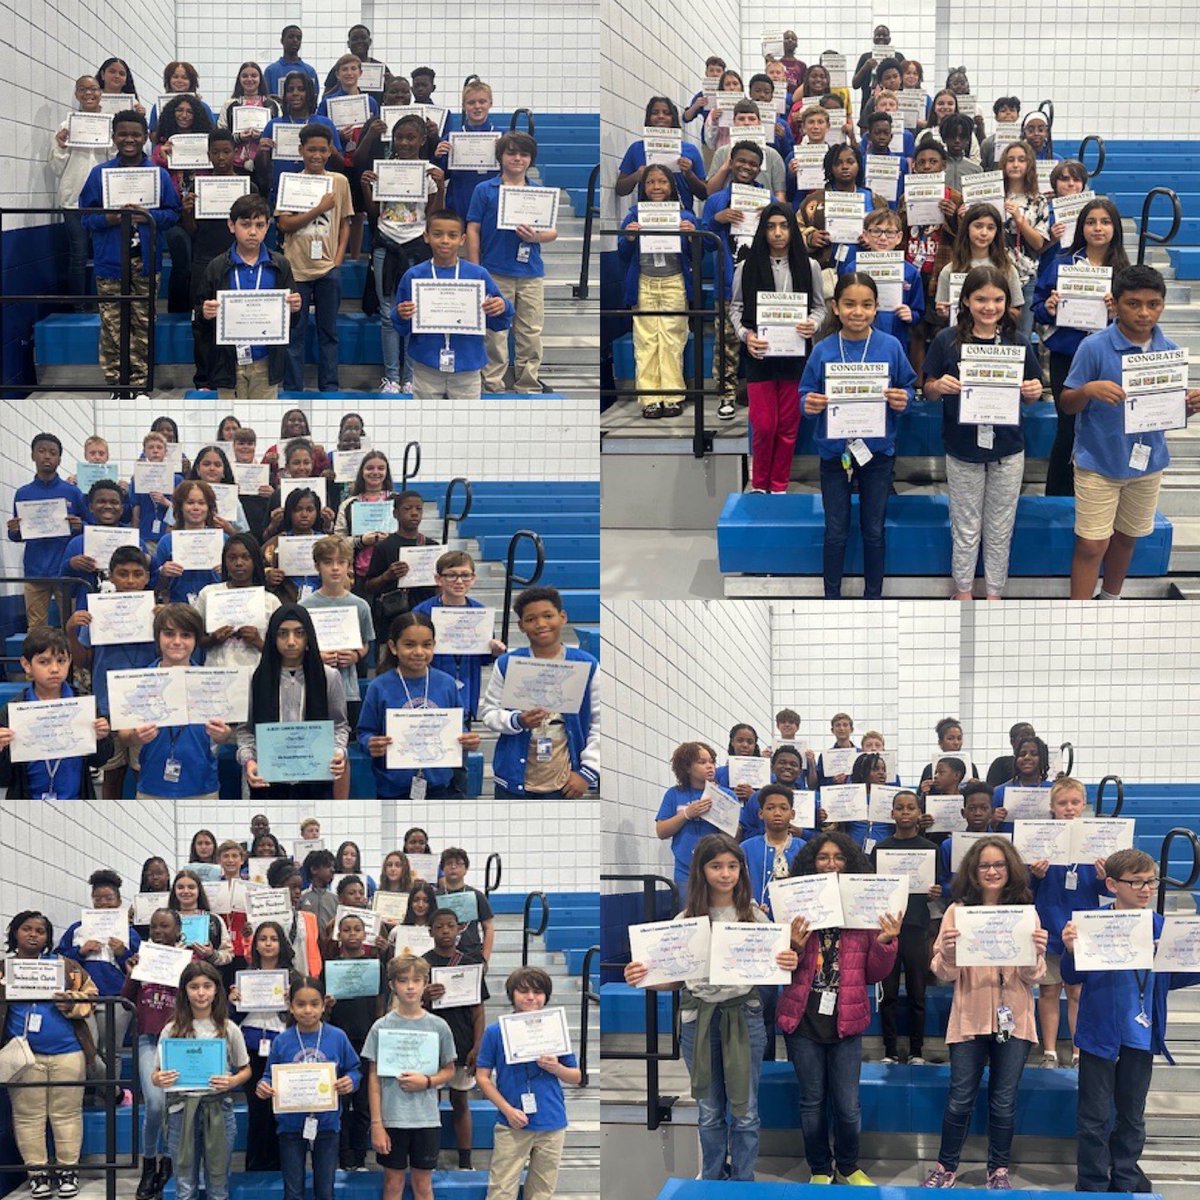 6th Grade Awards Ceremony 🎉 Our pirates are wrapping up the year by celebrating their many incredible accomplishments! 🌟 #ExpectExcellence #PiratePride